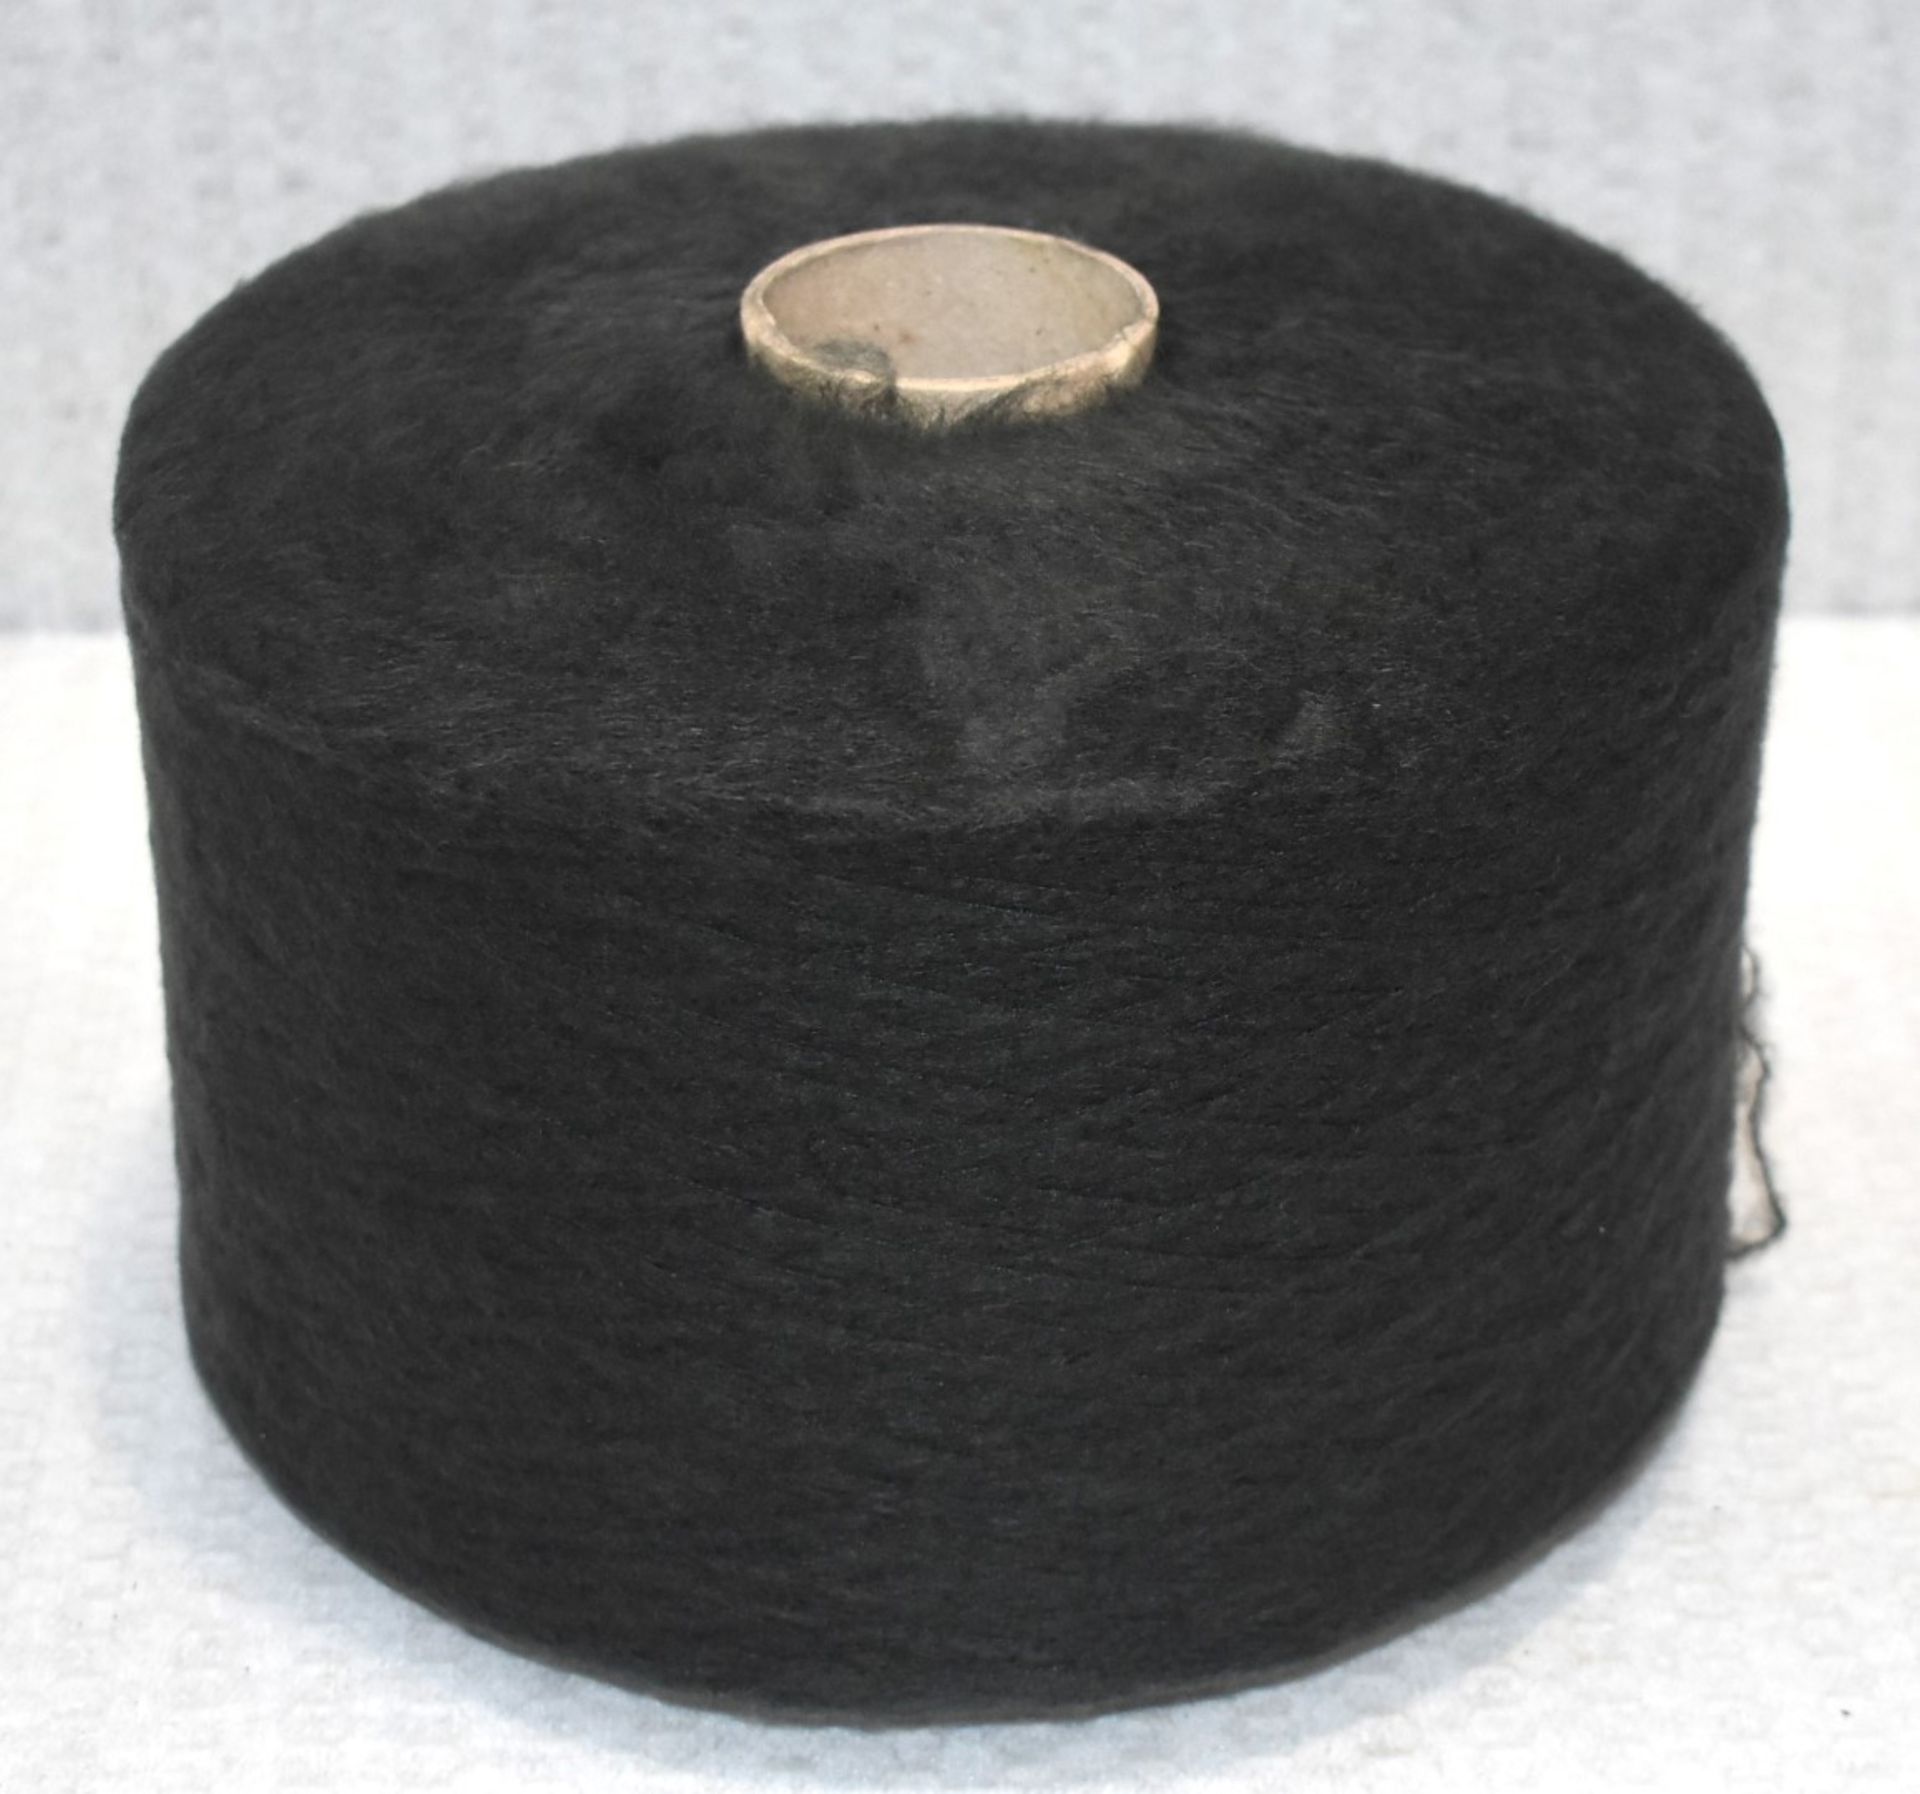 6 x Cones of 1/7,5 Lagona Knitting Yarn - Charcoal - Approx Weight: 2,300g - New Stock ABL Yarn - Image 2 of 11